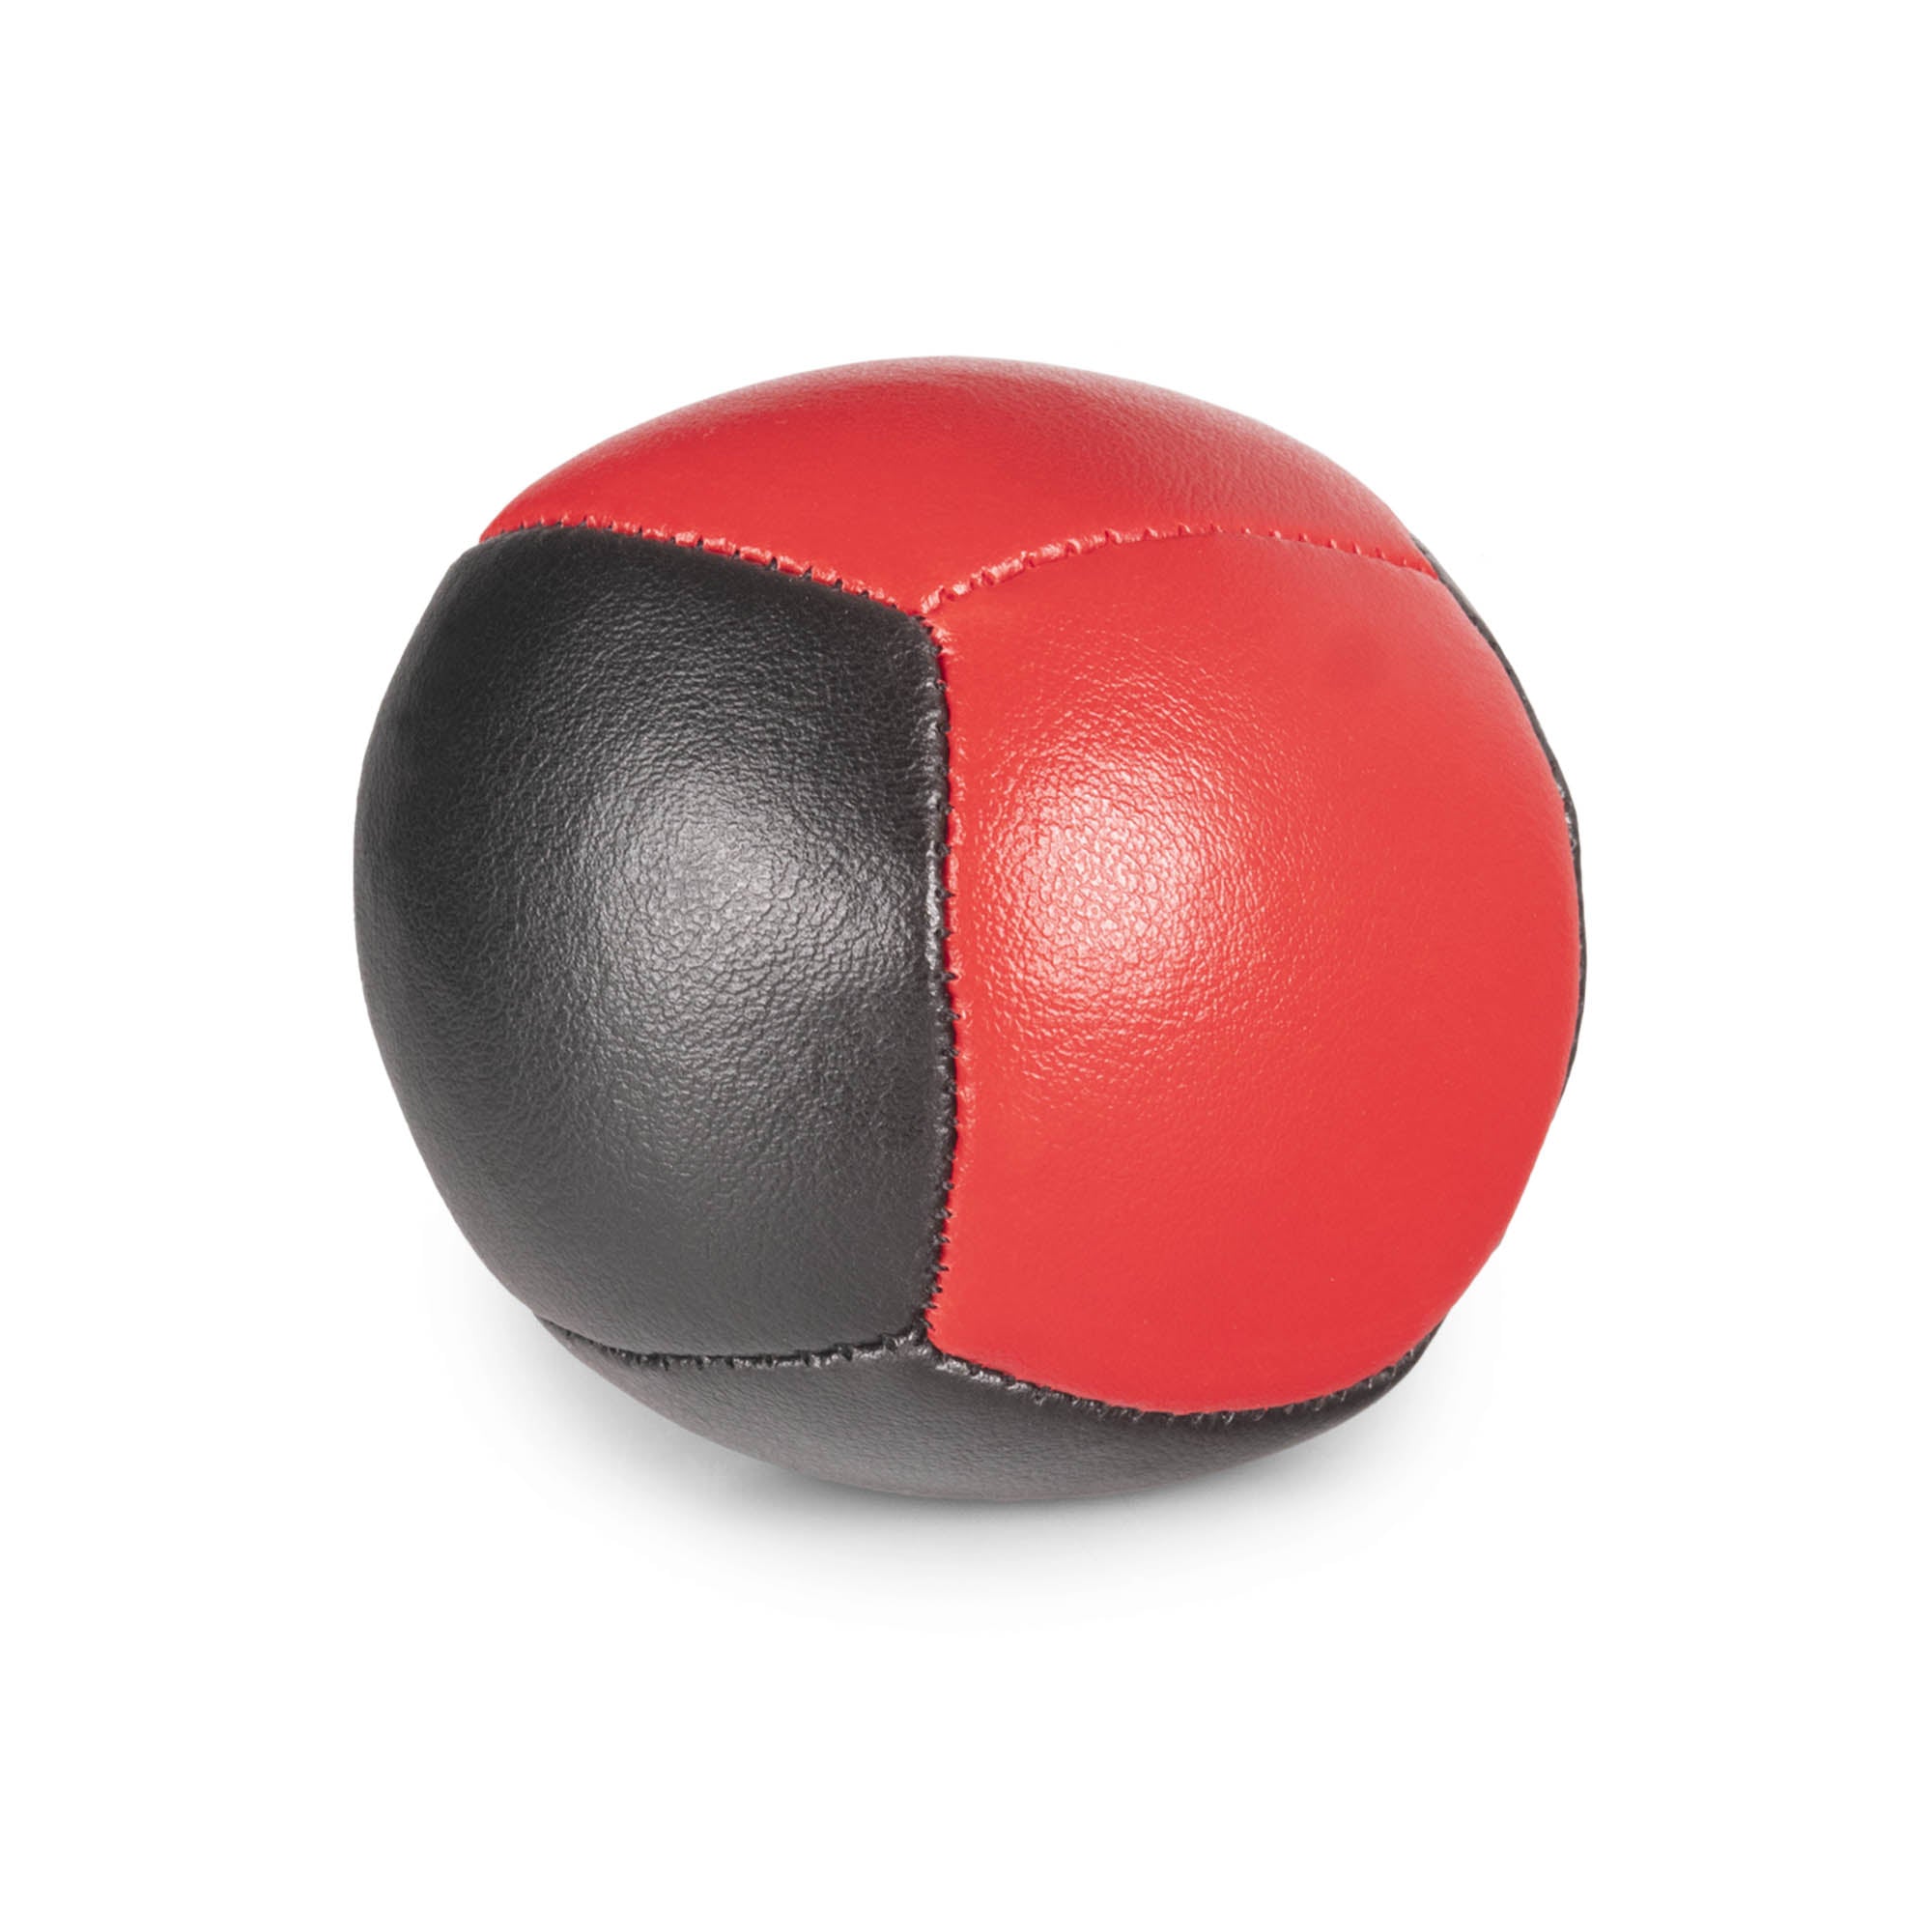 Firetoys red/black 110g thud juggling ball, straight on in a white background